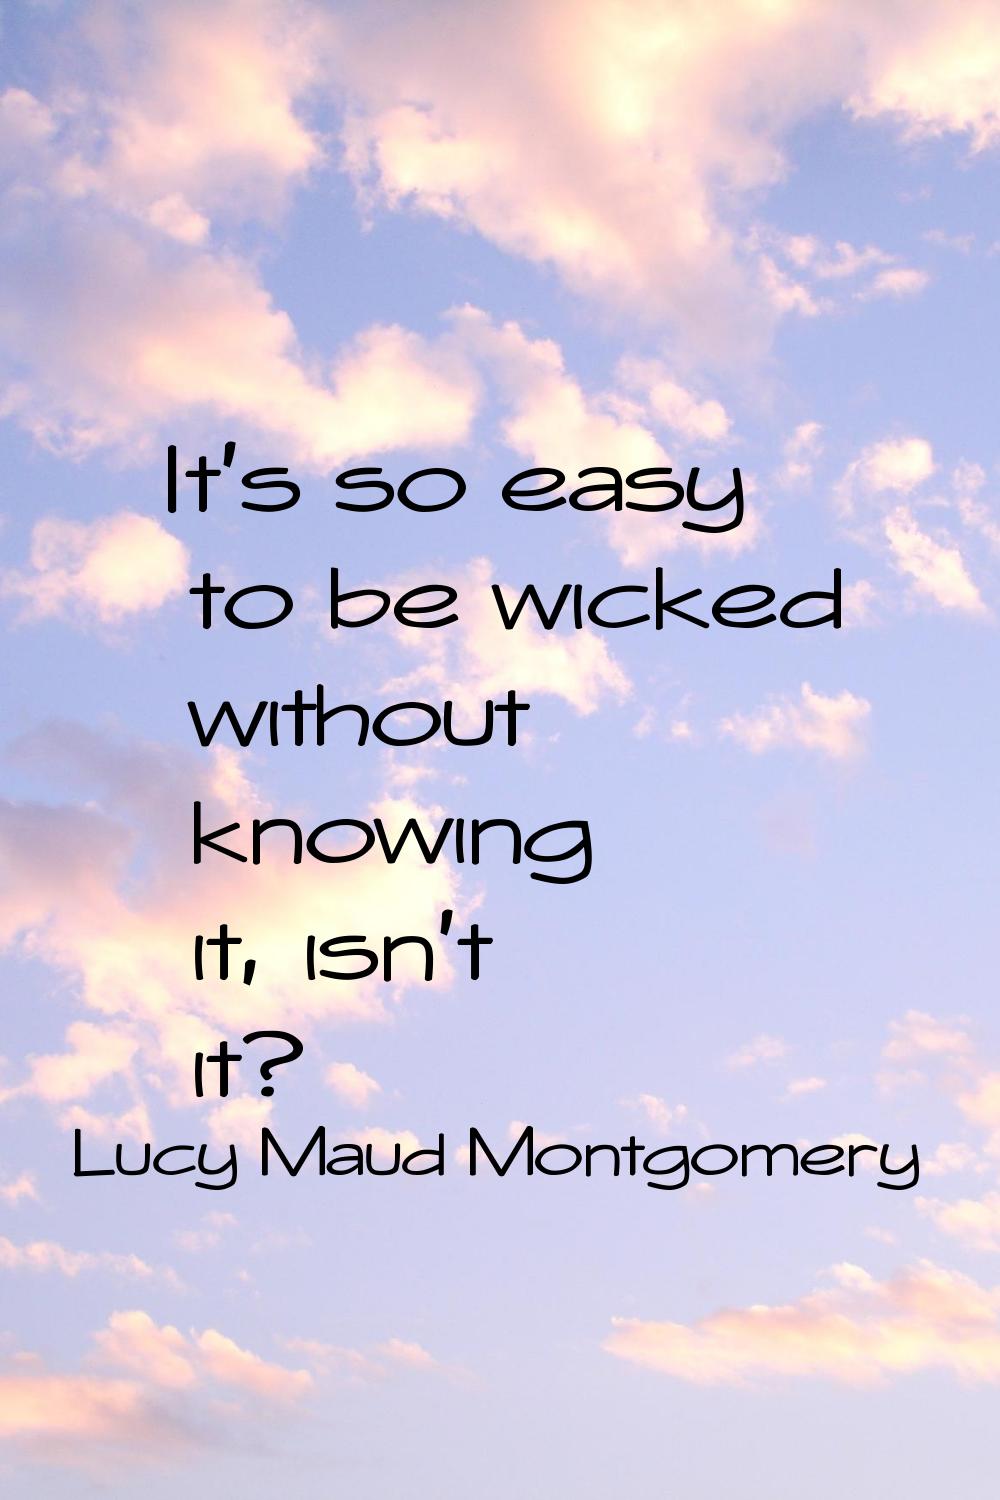 It's so easy to be wicked without knowing it, isn't it?